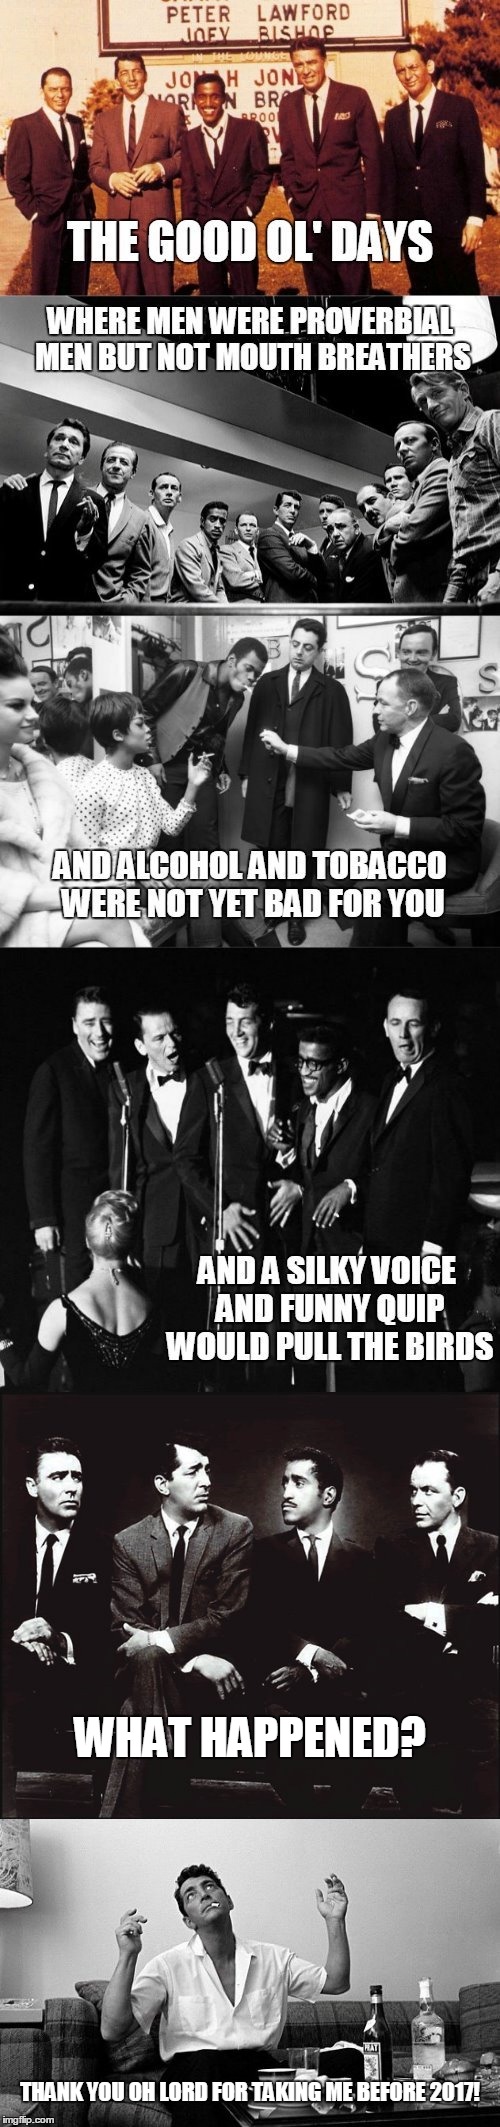 a bit before MY time though | WHAT HAPPENED? THANK YOU OH LORD FOR TAKING ME BEFORE 2017! | image tagged in memes,rat pack week,rat pack,dean martin,frank sinatra,good old days | made w/ Imgflip meme maker